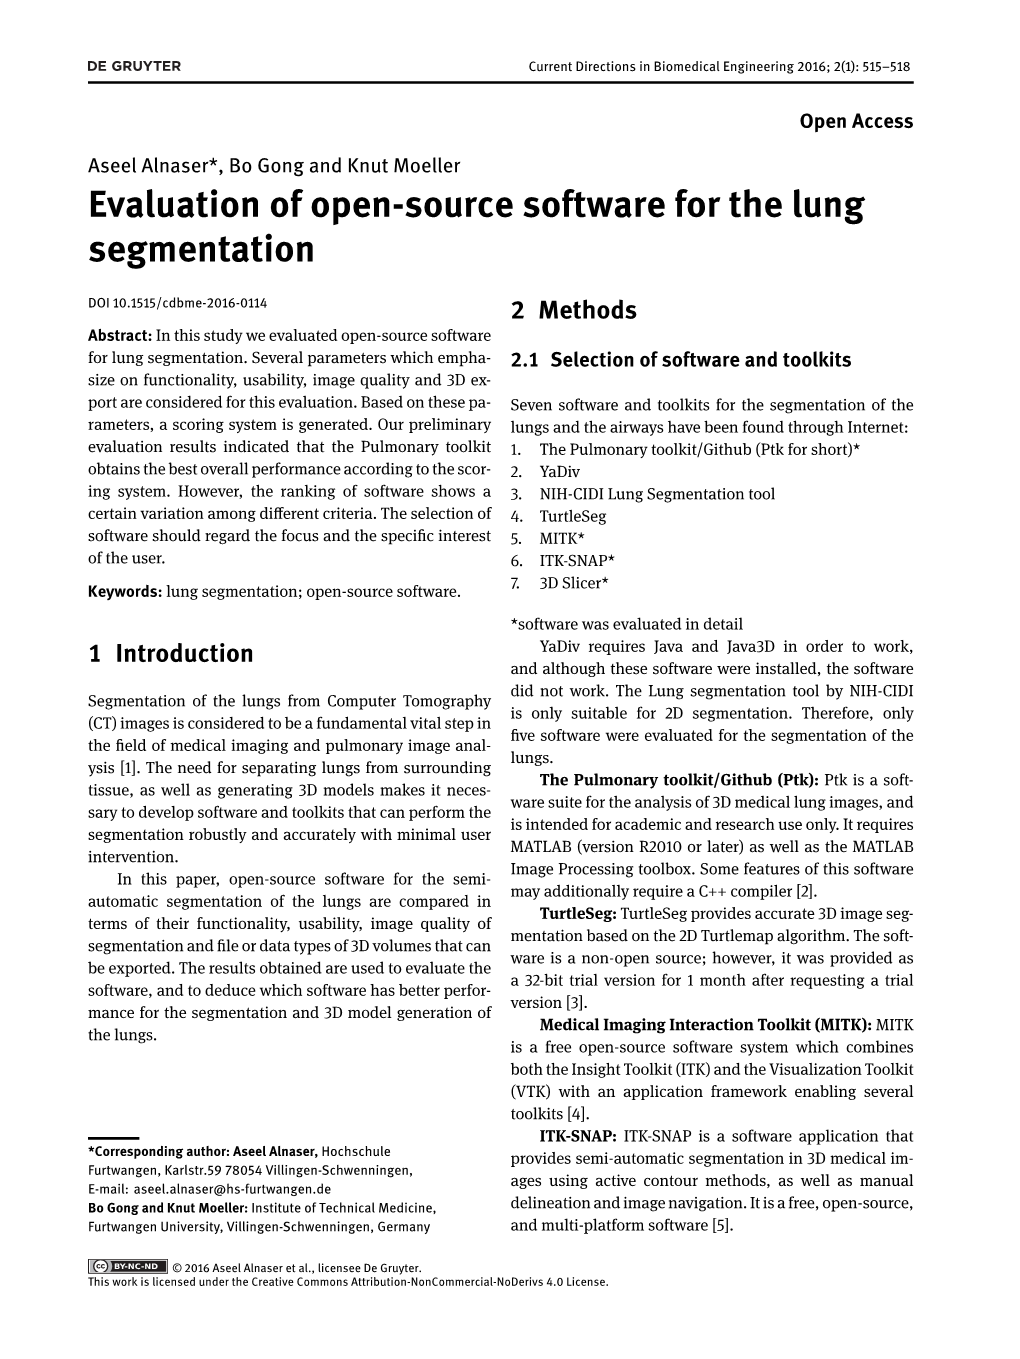 Evaluation of Open-Source Software for the Lung Segmentation